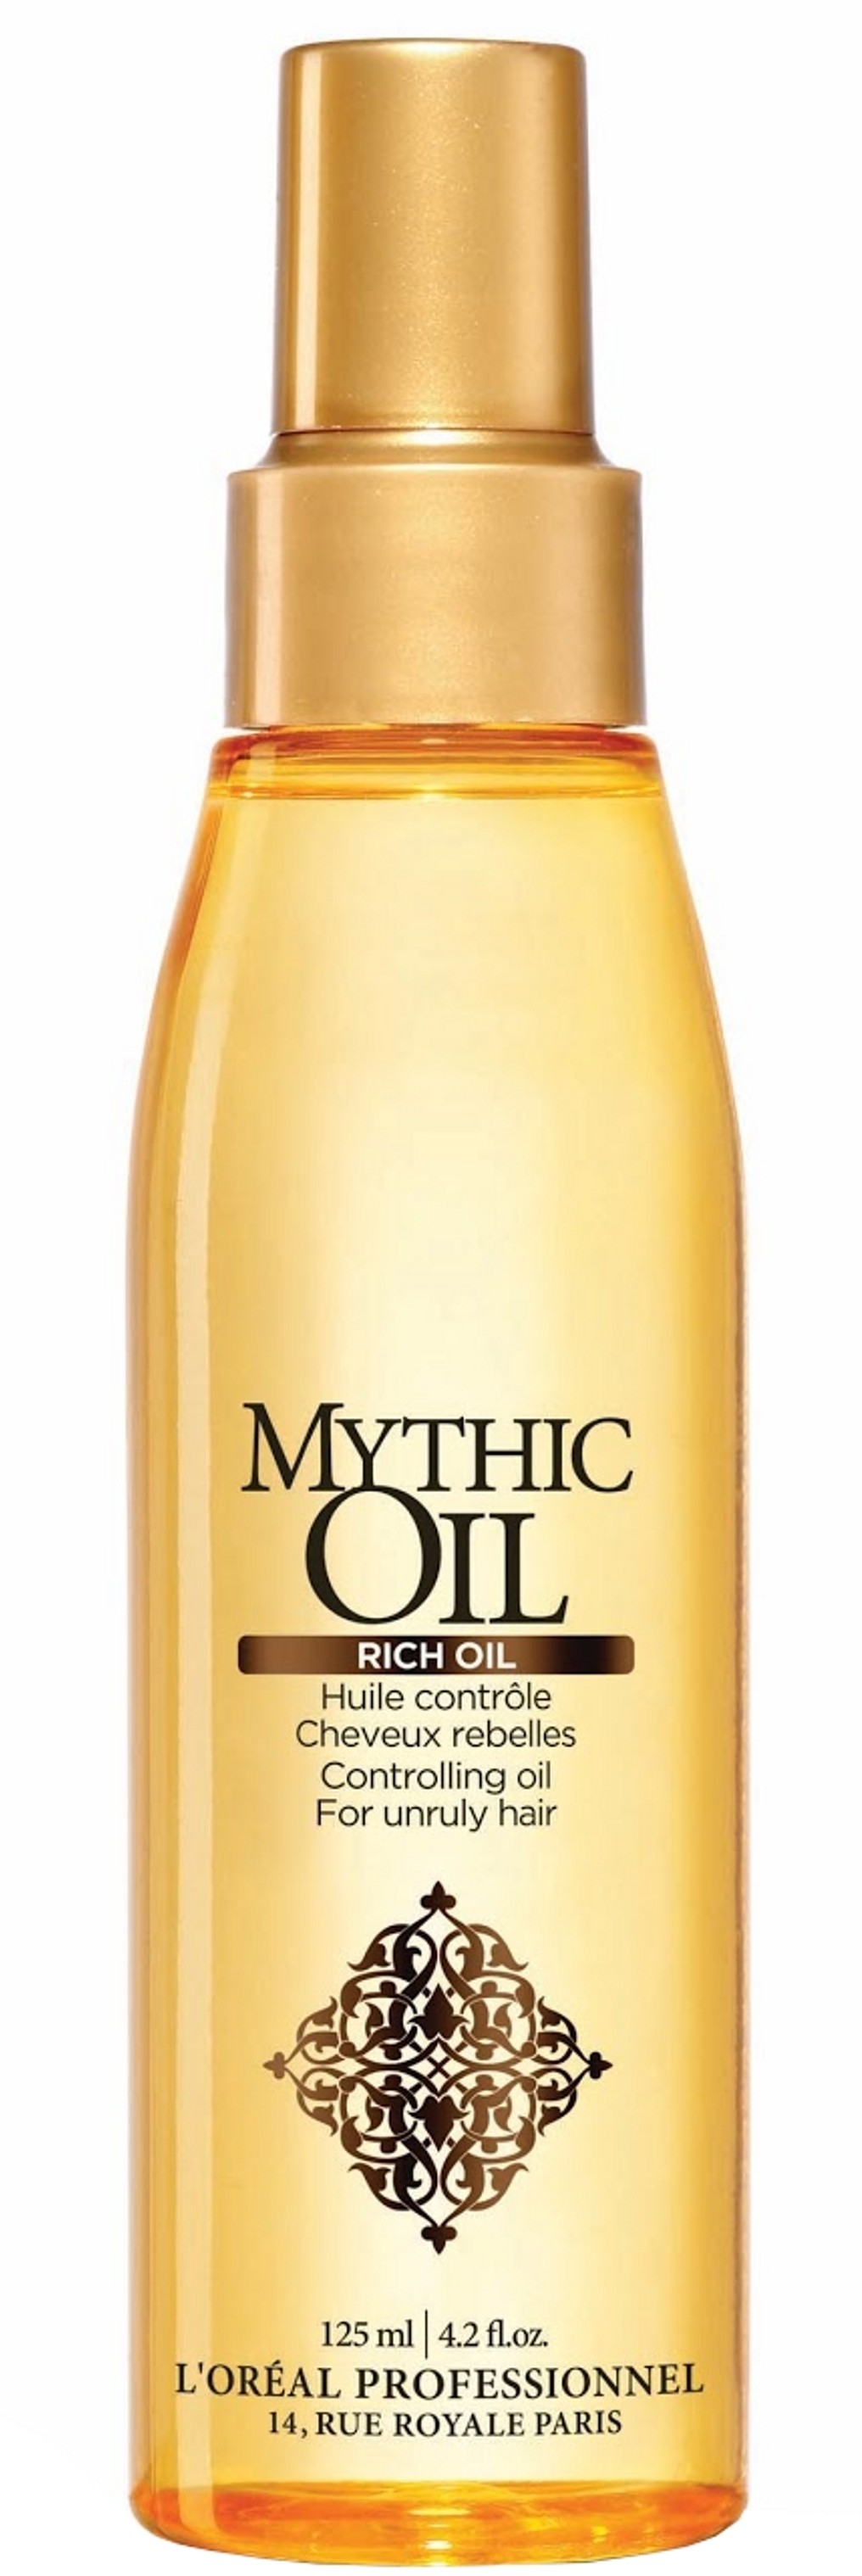 Масло l oreal professionnel. Масло Митик Ойл лореаль. Масло l'Oreal Mythic Oil. Митик оил масло для волос лореаль. L’Oreal Professionnel Mythic Oil Rich Oil;.